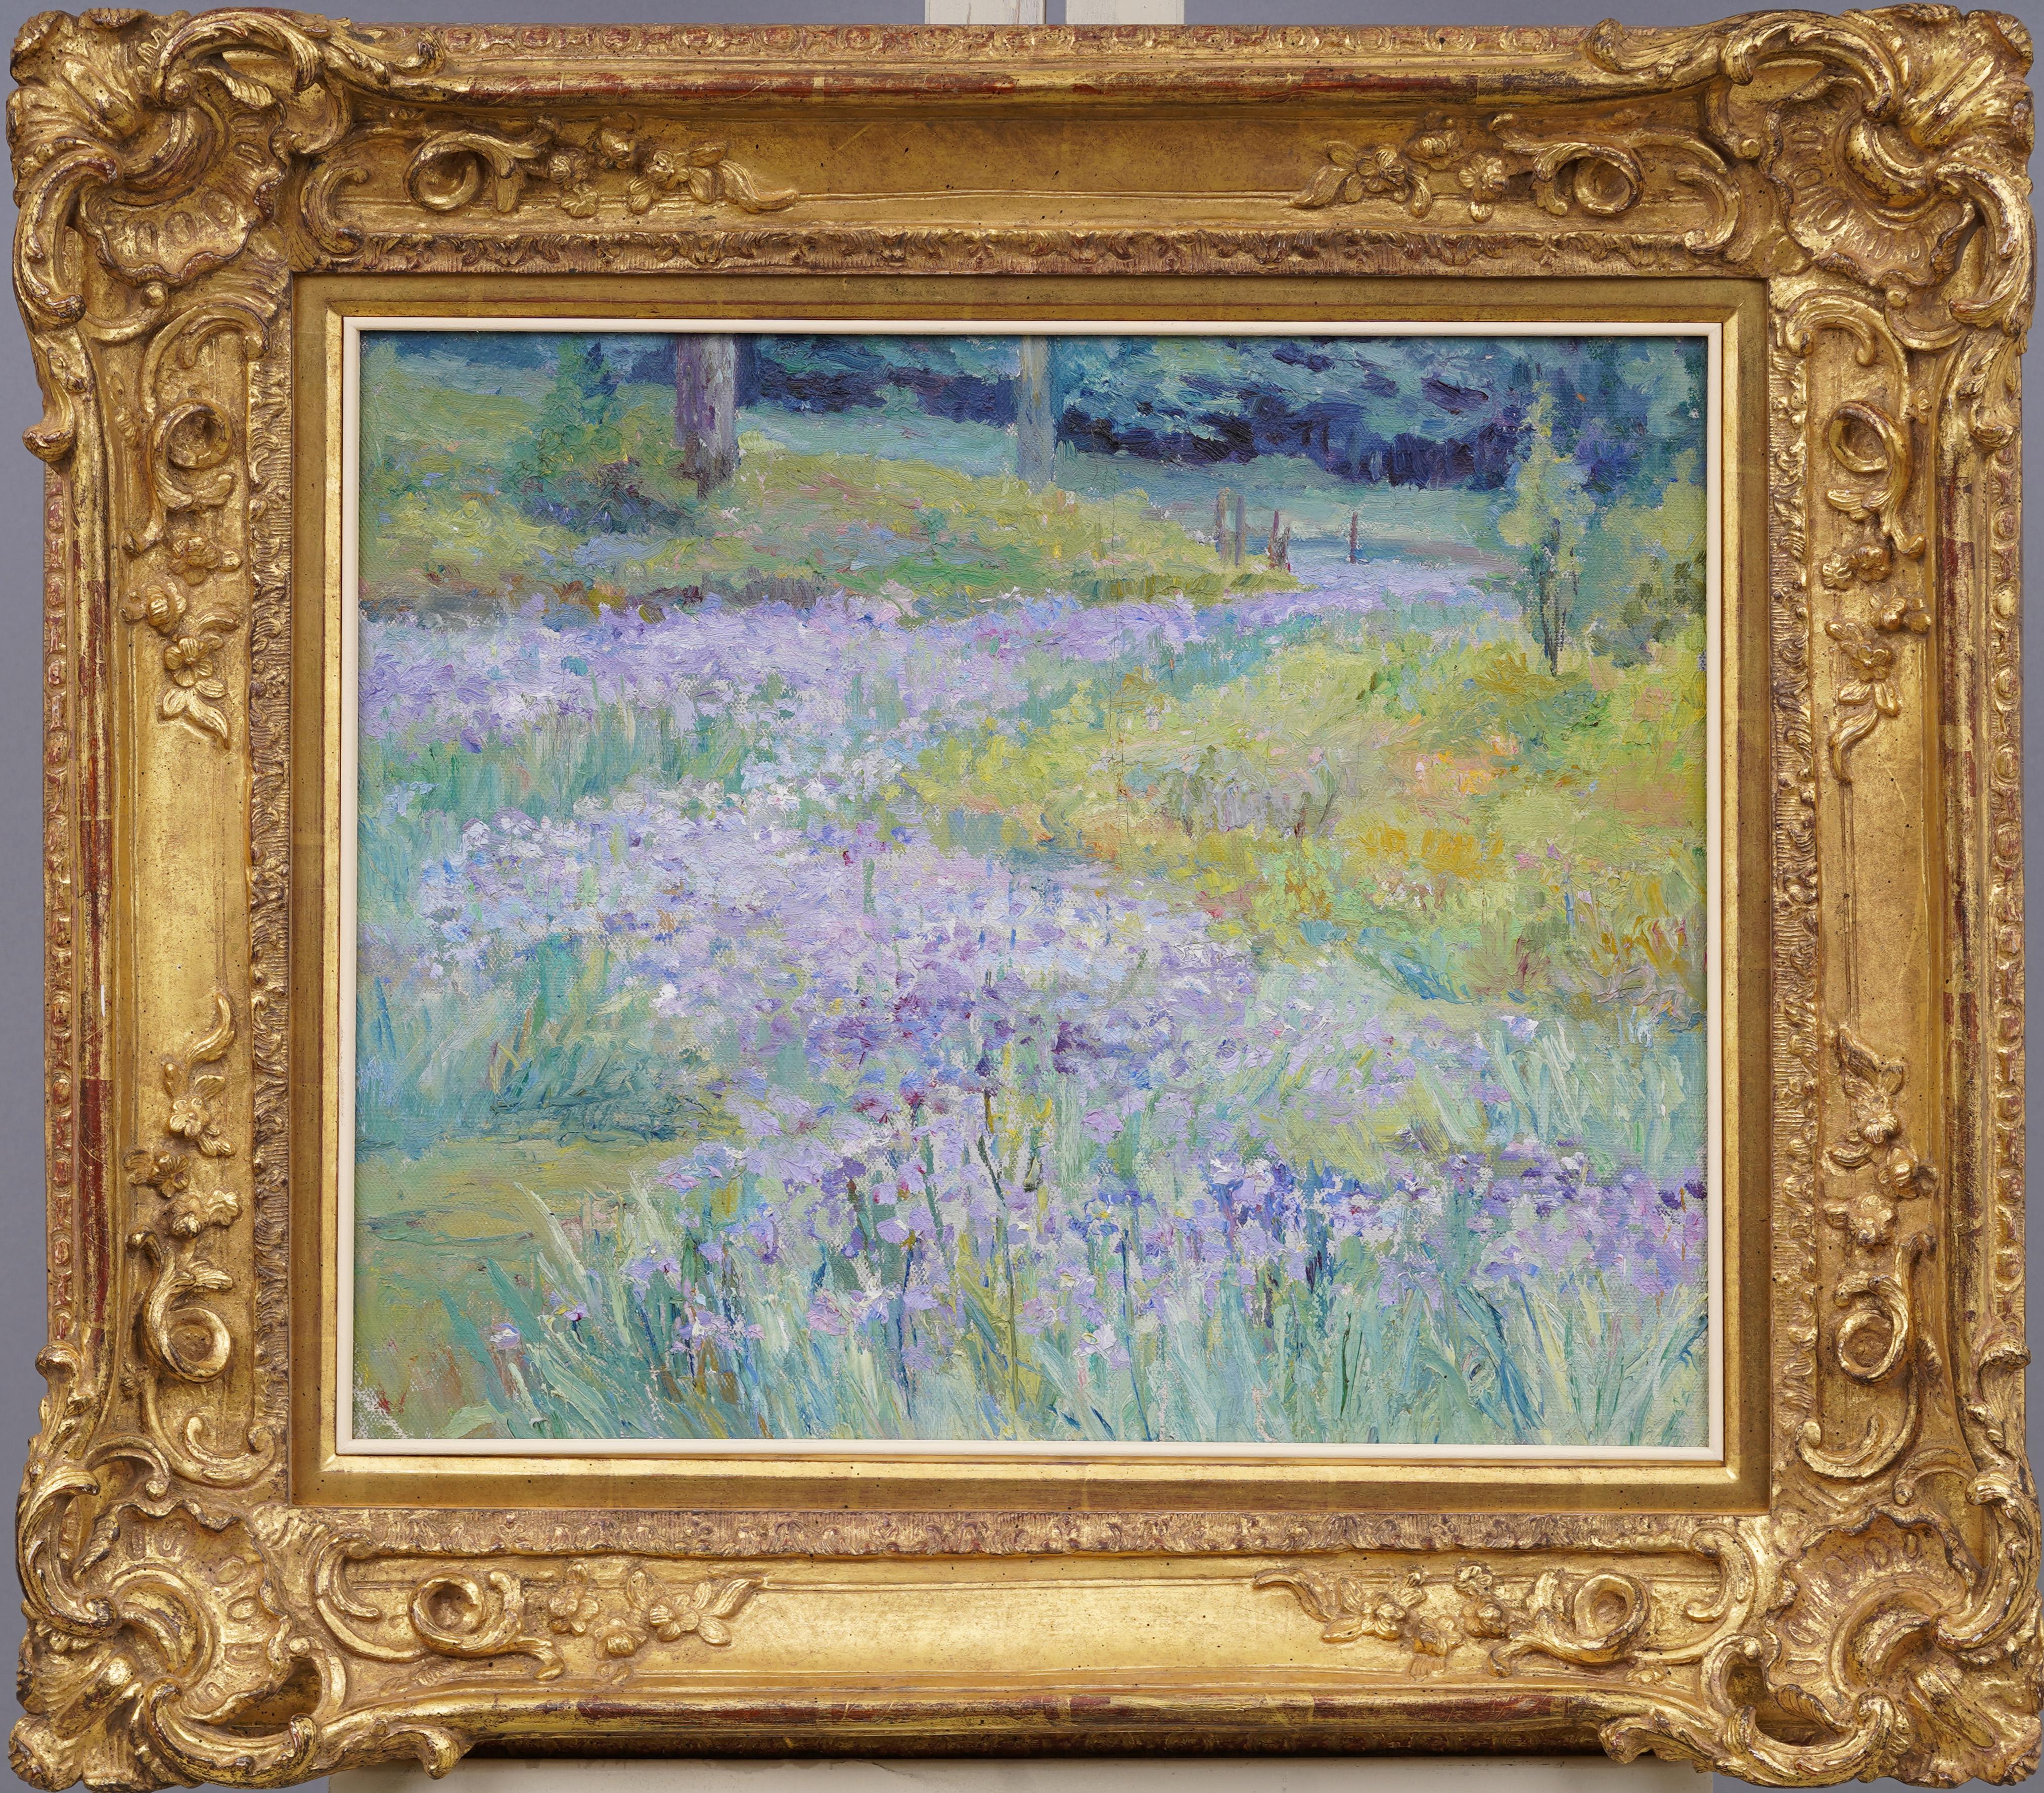 Mary Aubin Harris  Landscape Painting - Antique American Impressionist California Wild Flowers Framed Rare Oil Painting